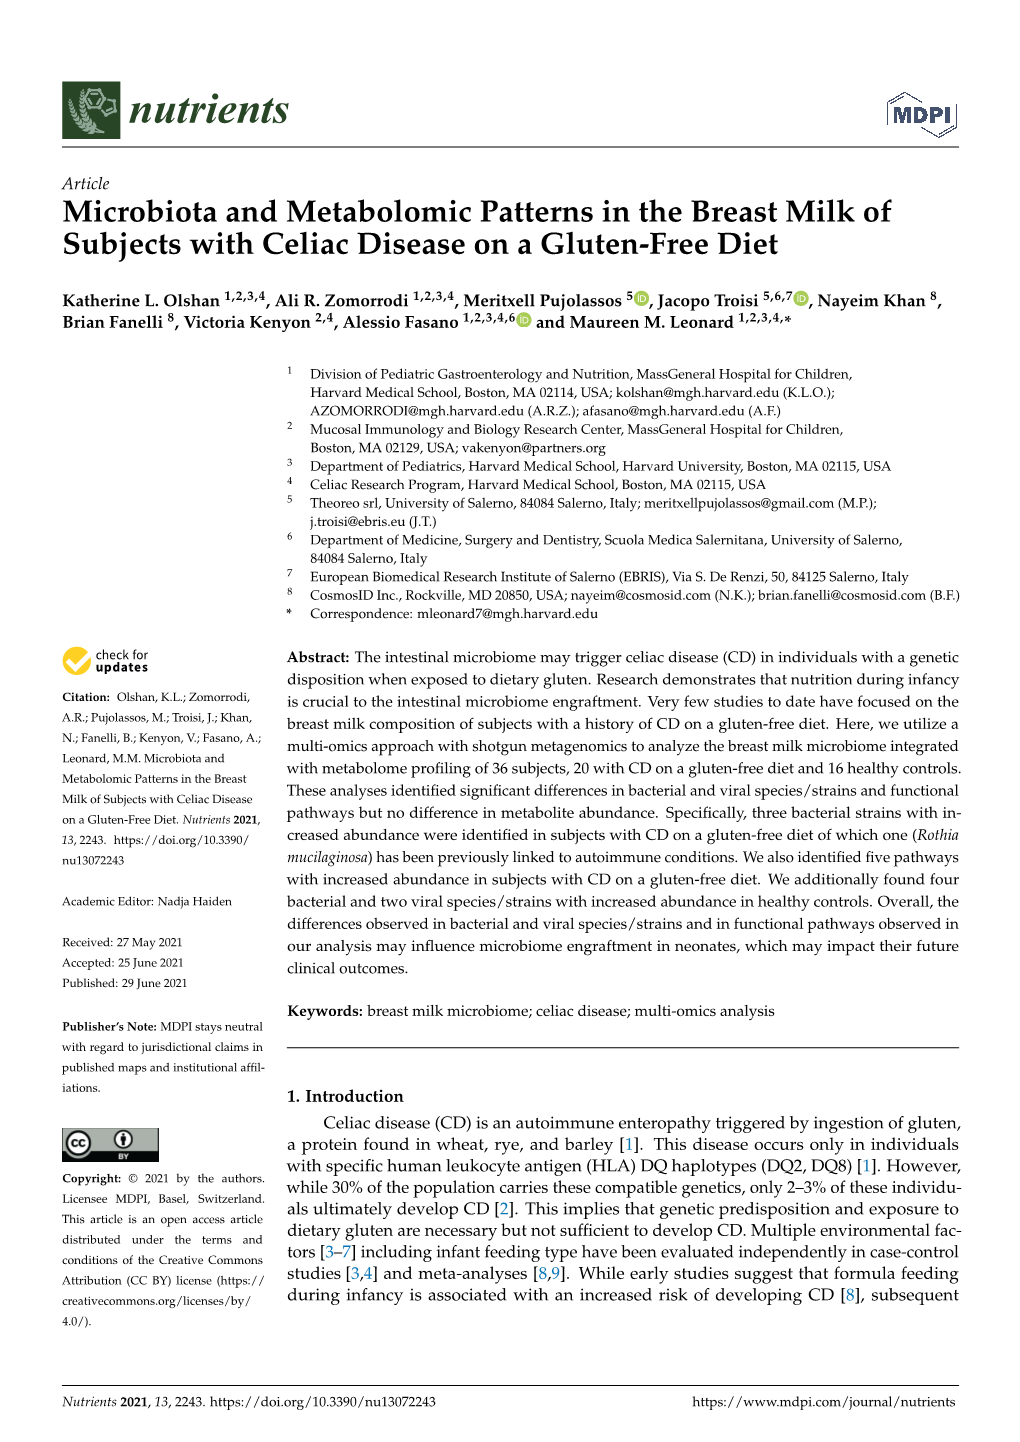 Microbiota and Metabolomic Patterns in the Breast Milk of Subjects with Celiac Disease on a Gluten-Free Diet